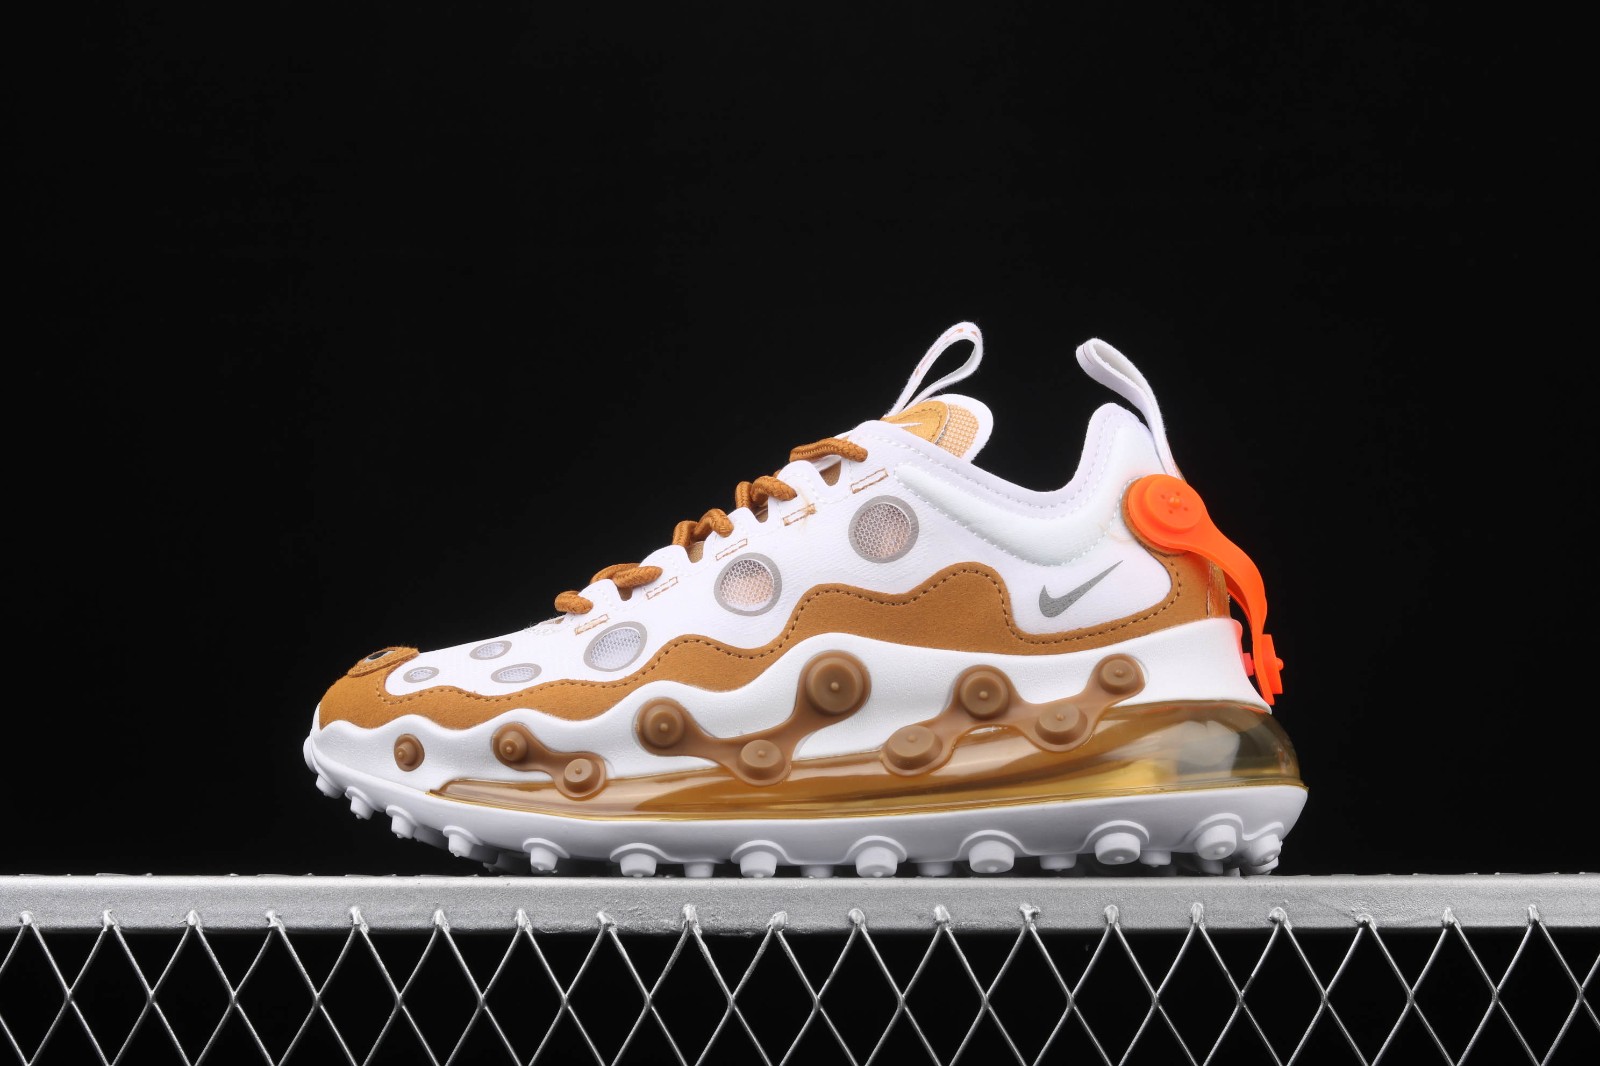 nike special field boots sale clearance free - Nike Air Max 720 ISPA Gold Color White CD2182 - 008 - GmarShops